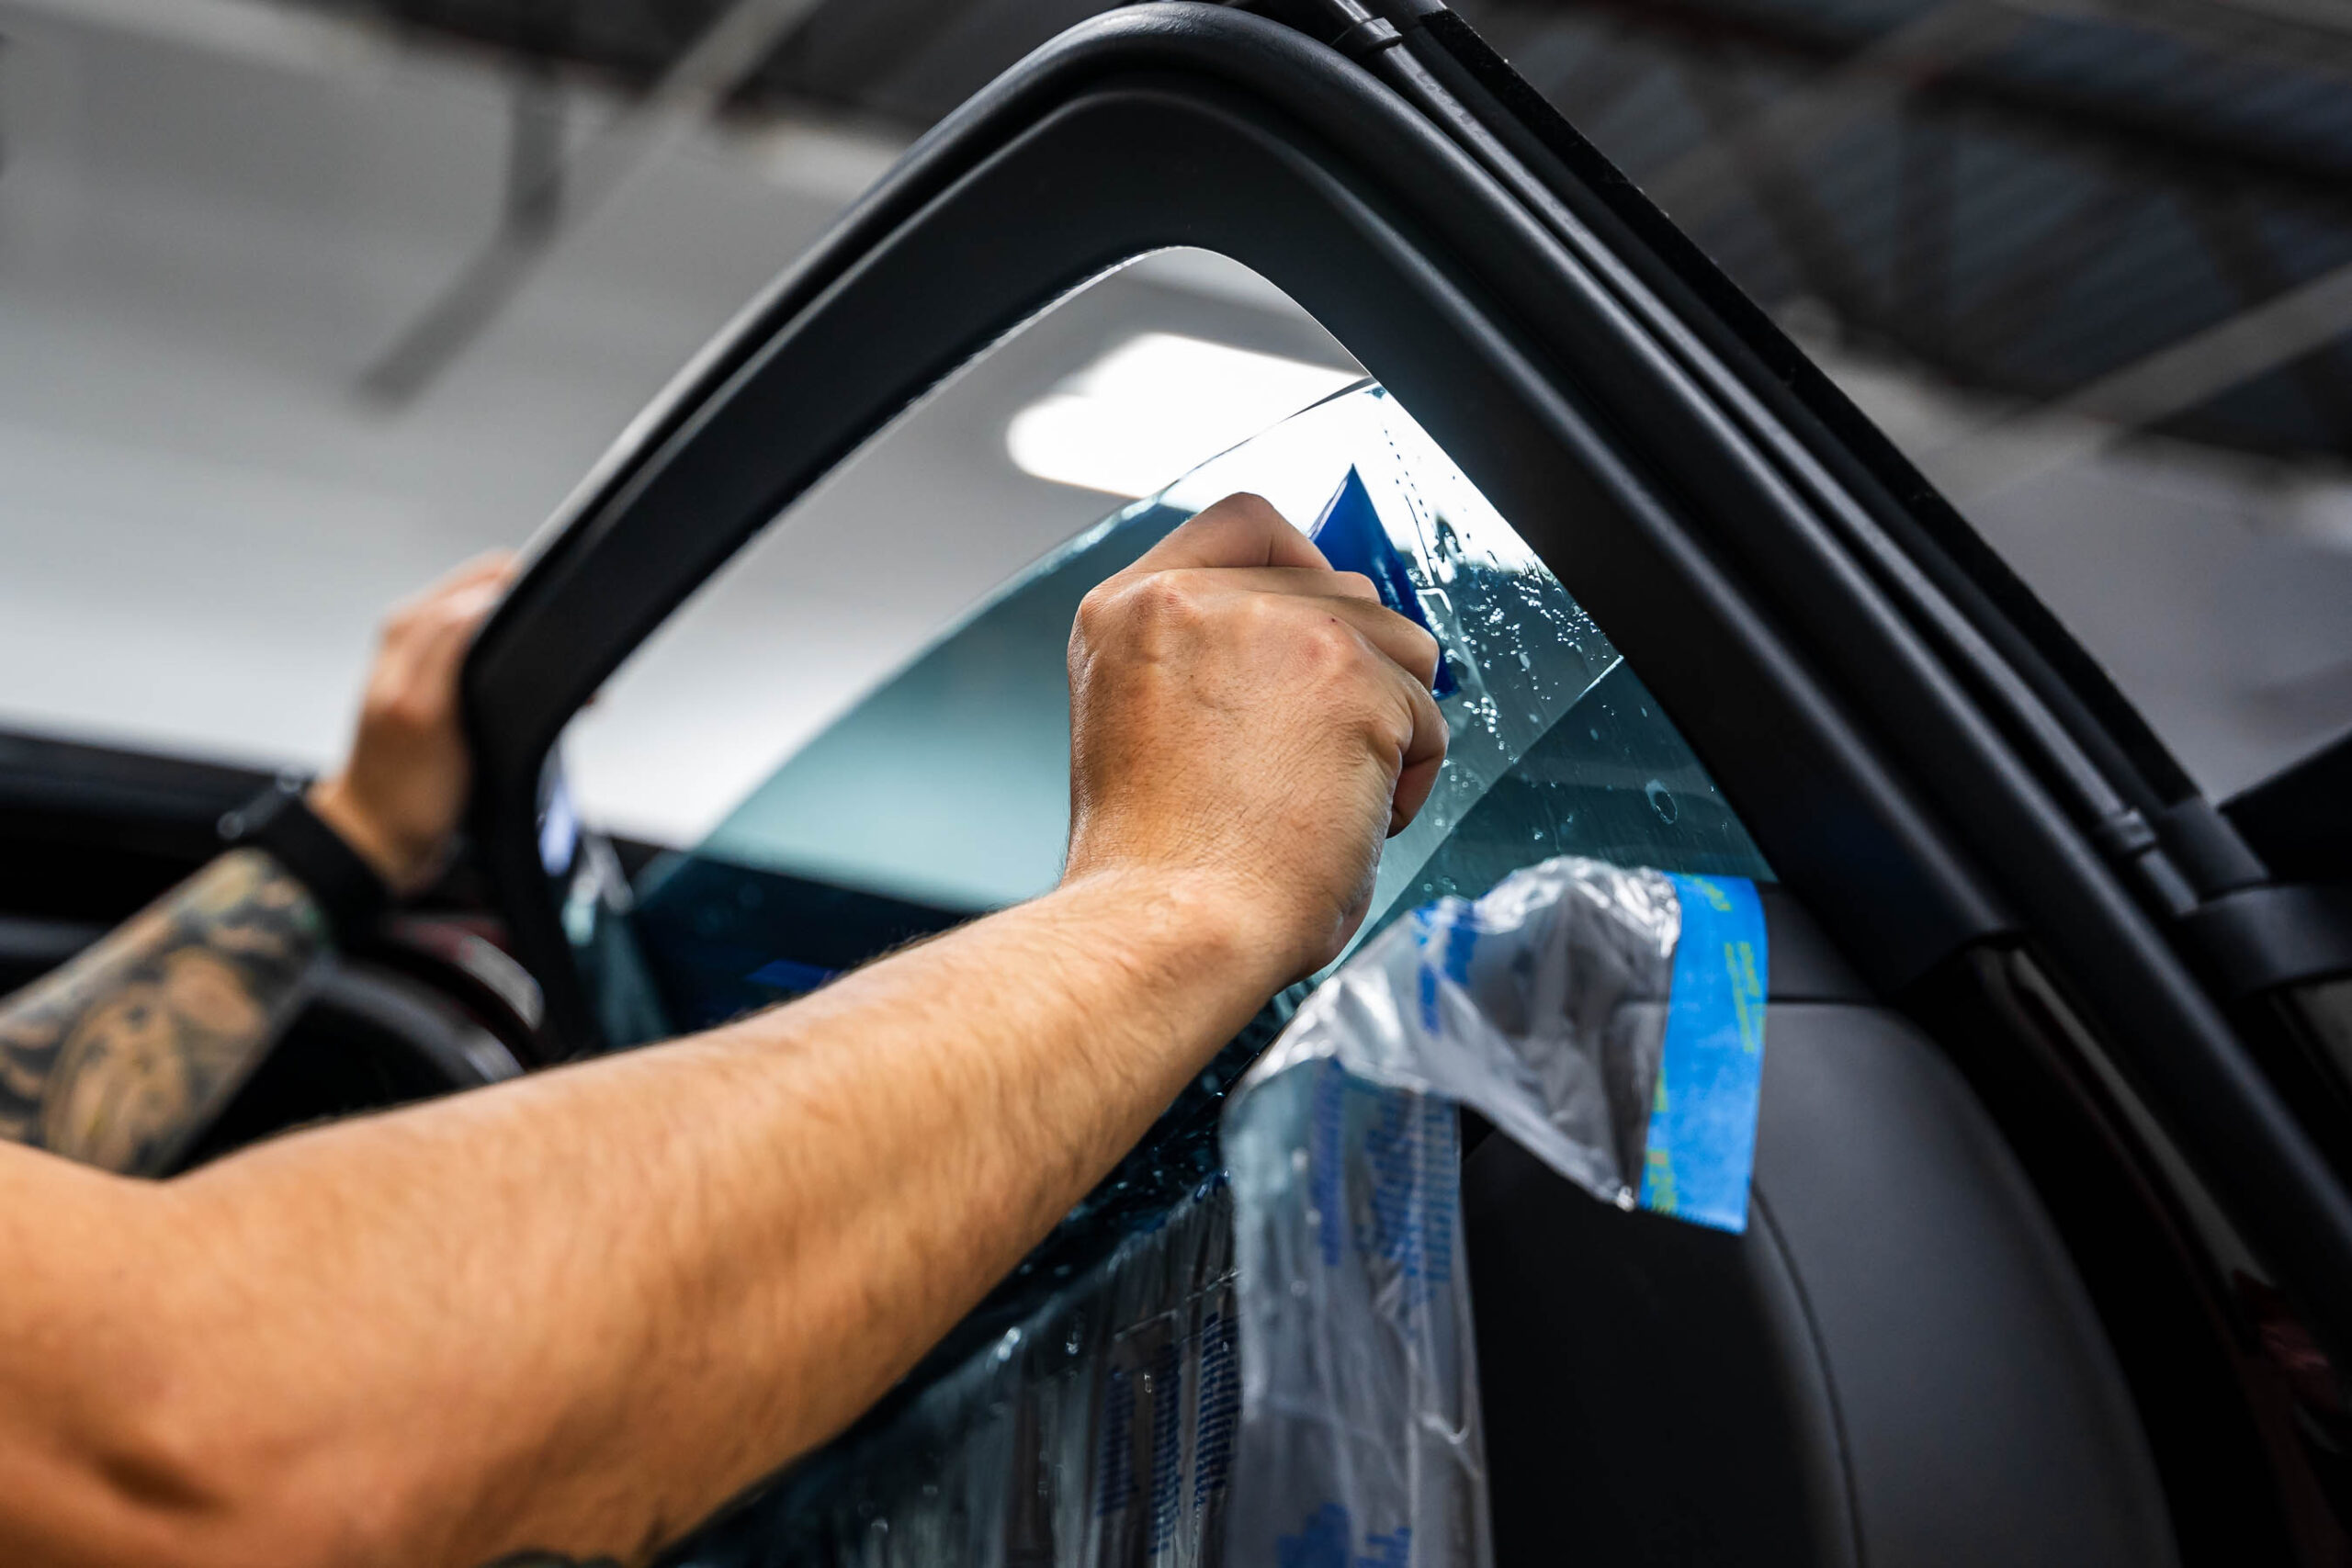 Using a squeegee to install tint on passenger front window